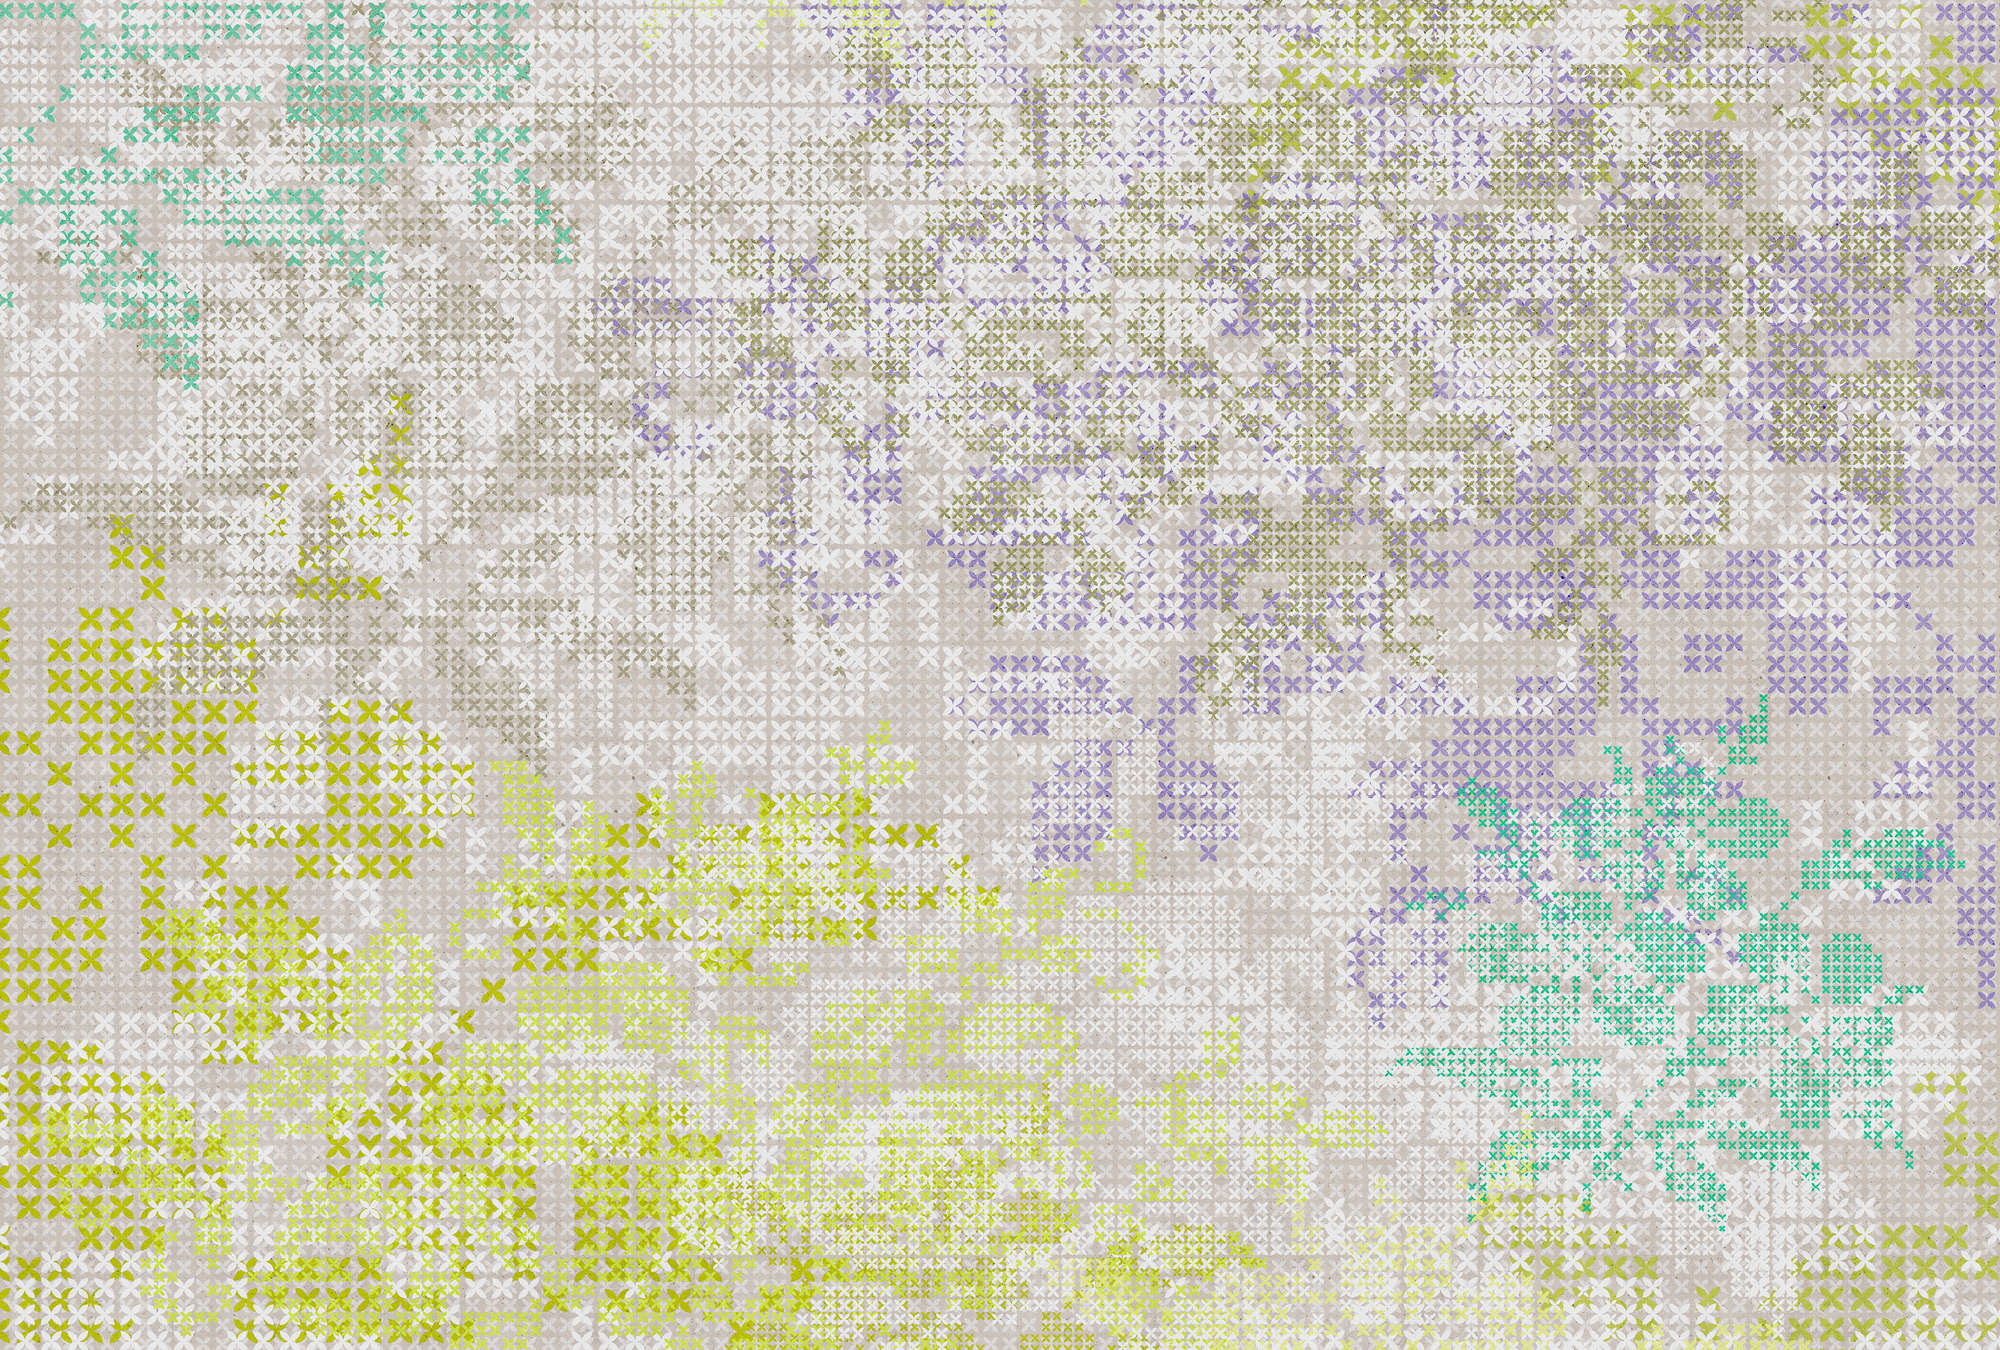             Flowers mural with pixel pattern - colourful, grey
        